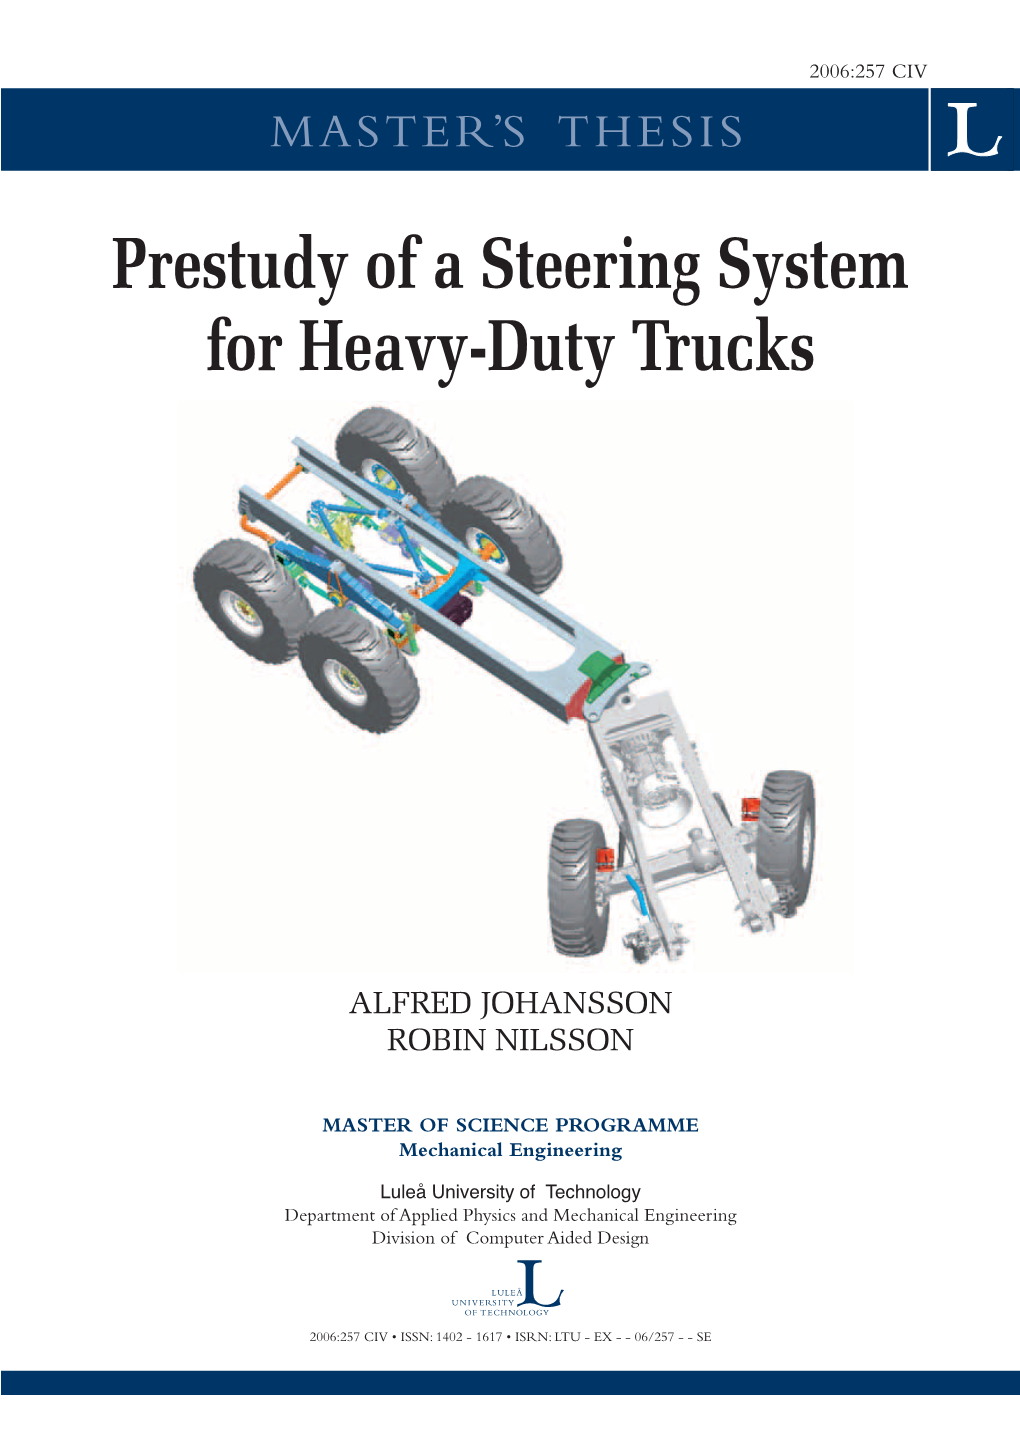 Prestudy of a Steering System for Heavy-Duty Trucks